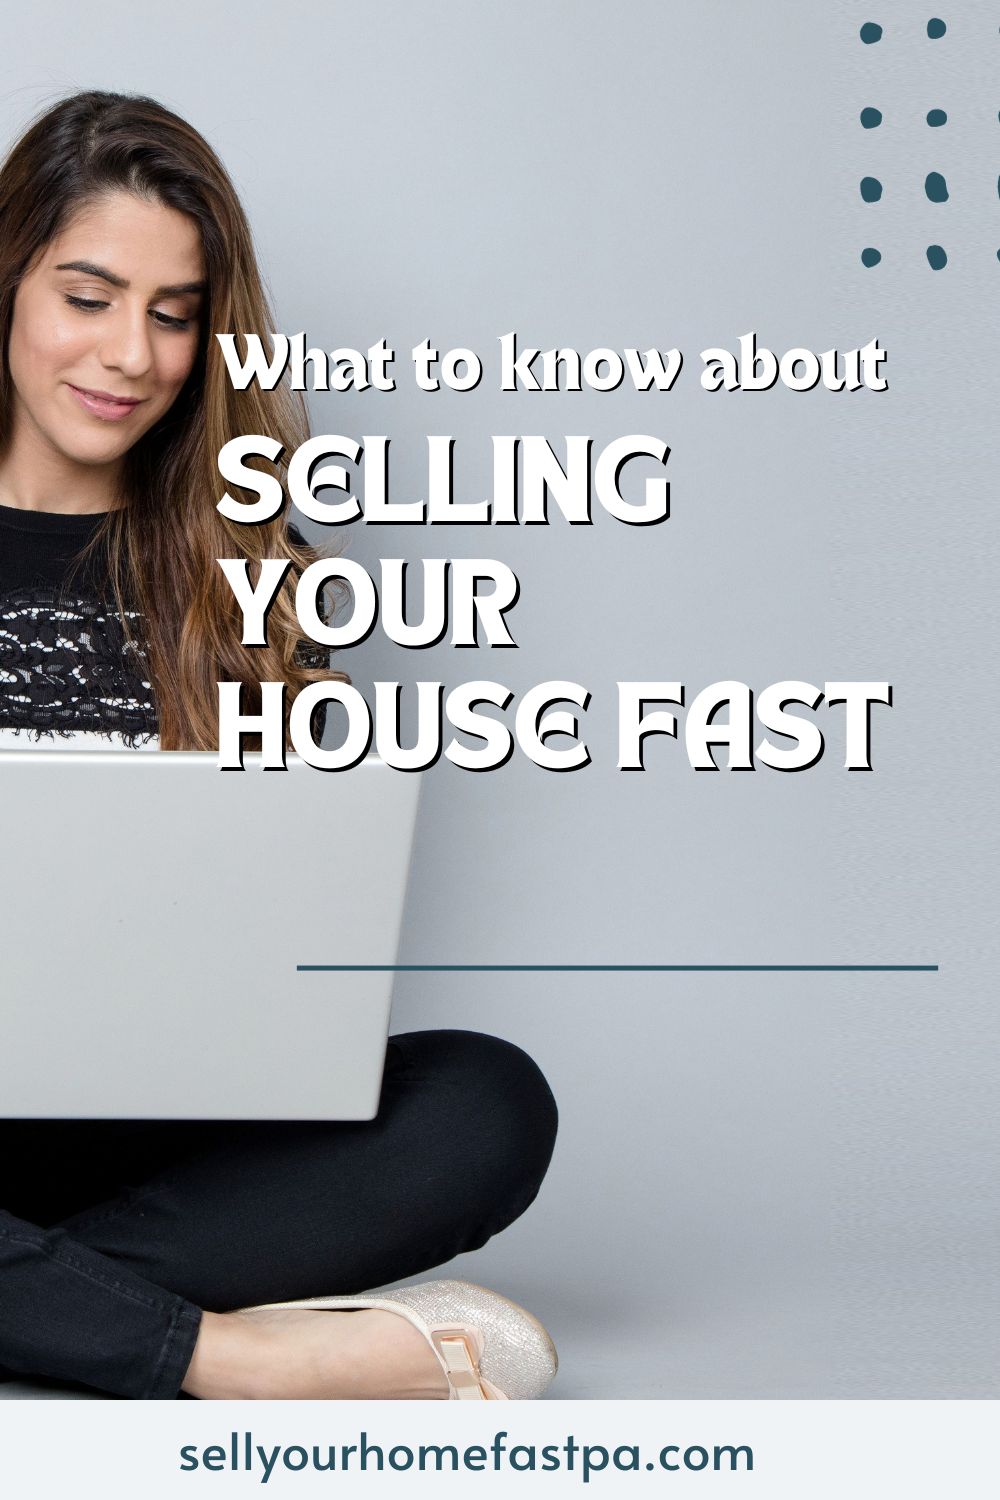 What Should I Know About Selling My House Fast?